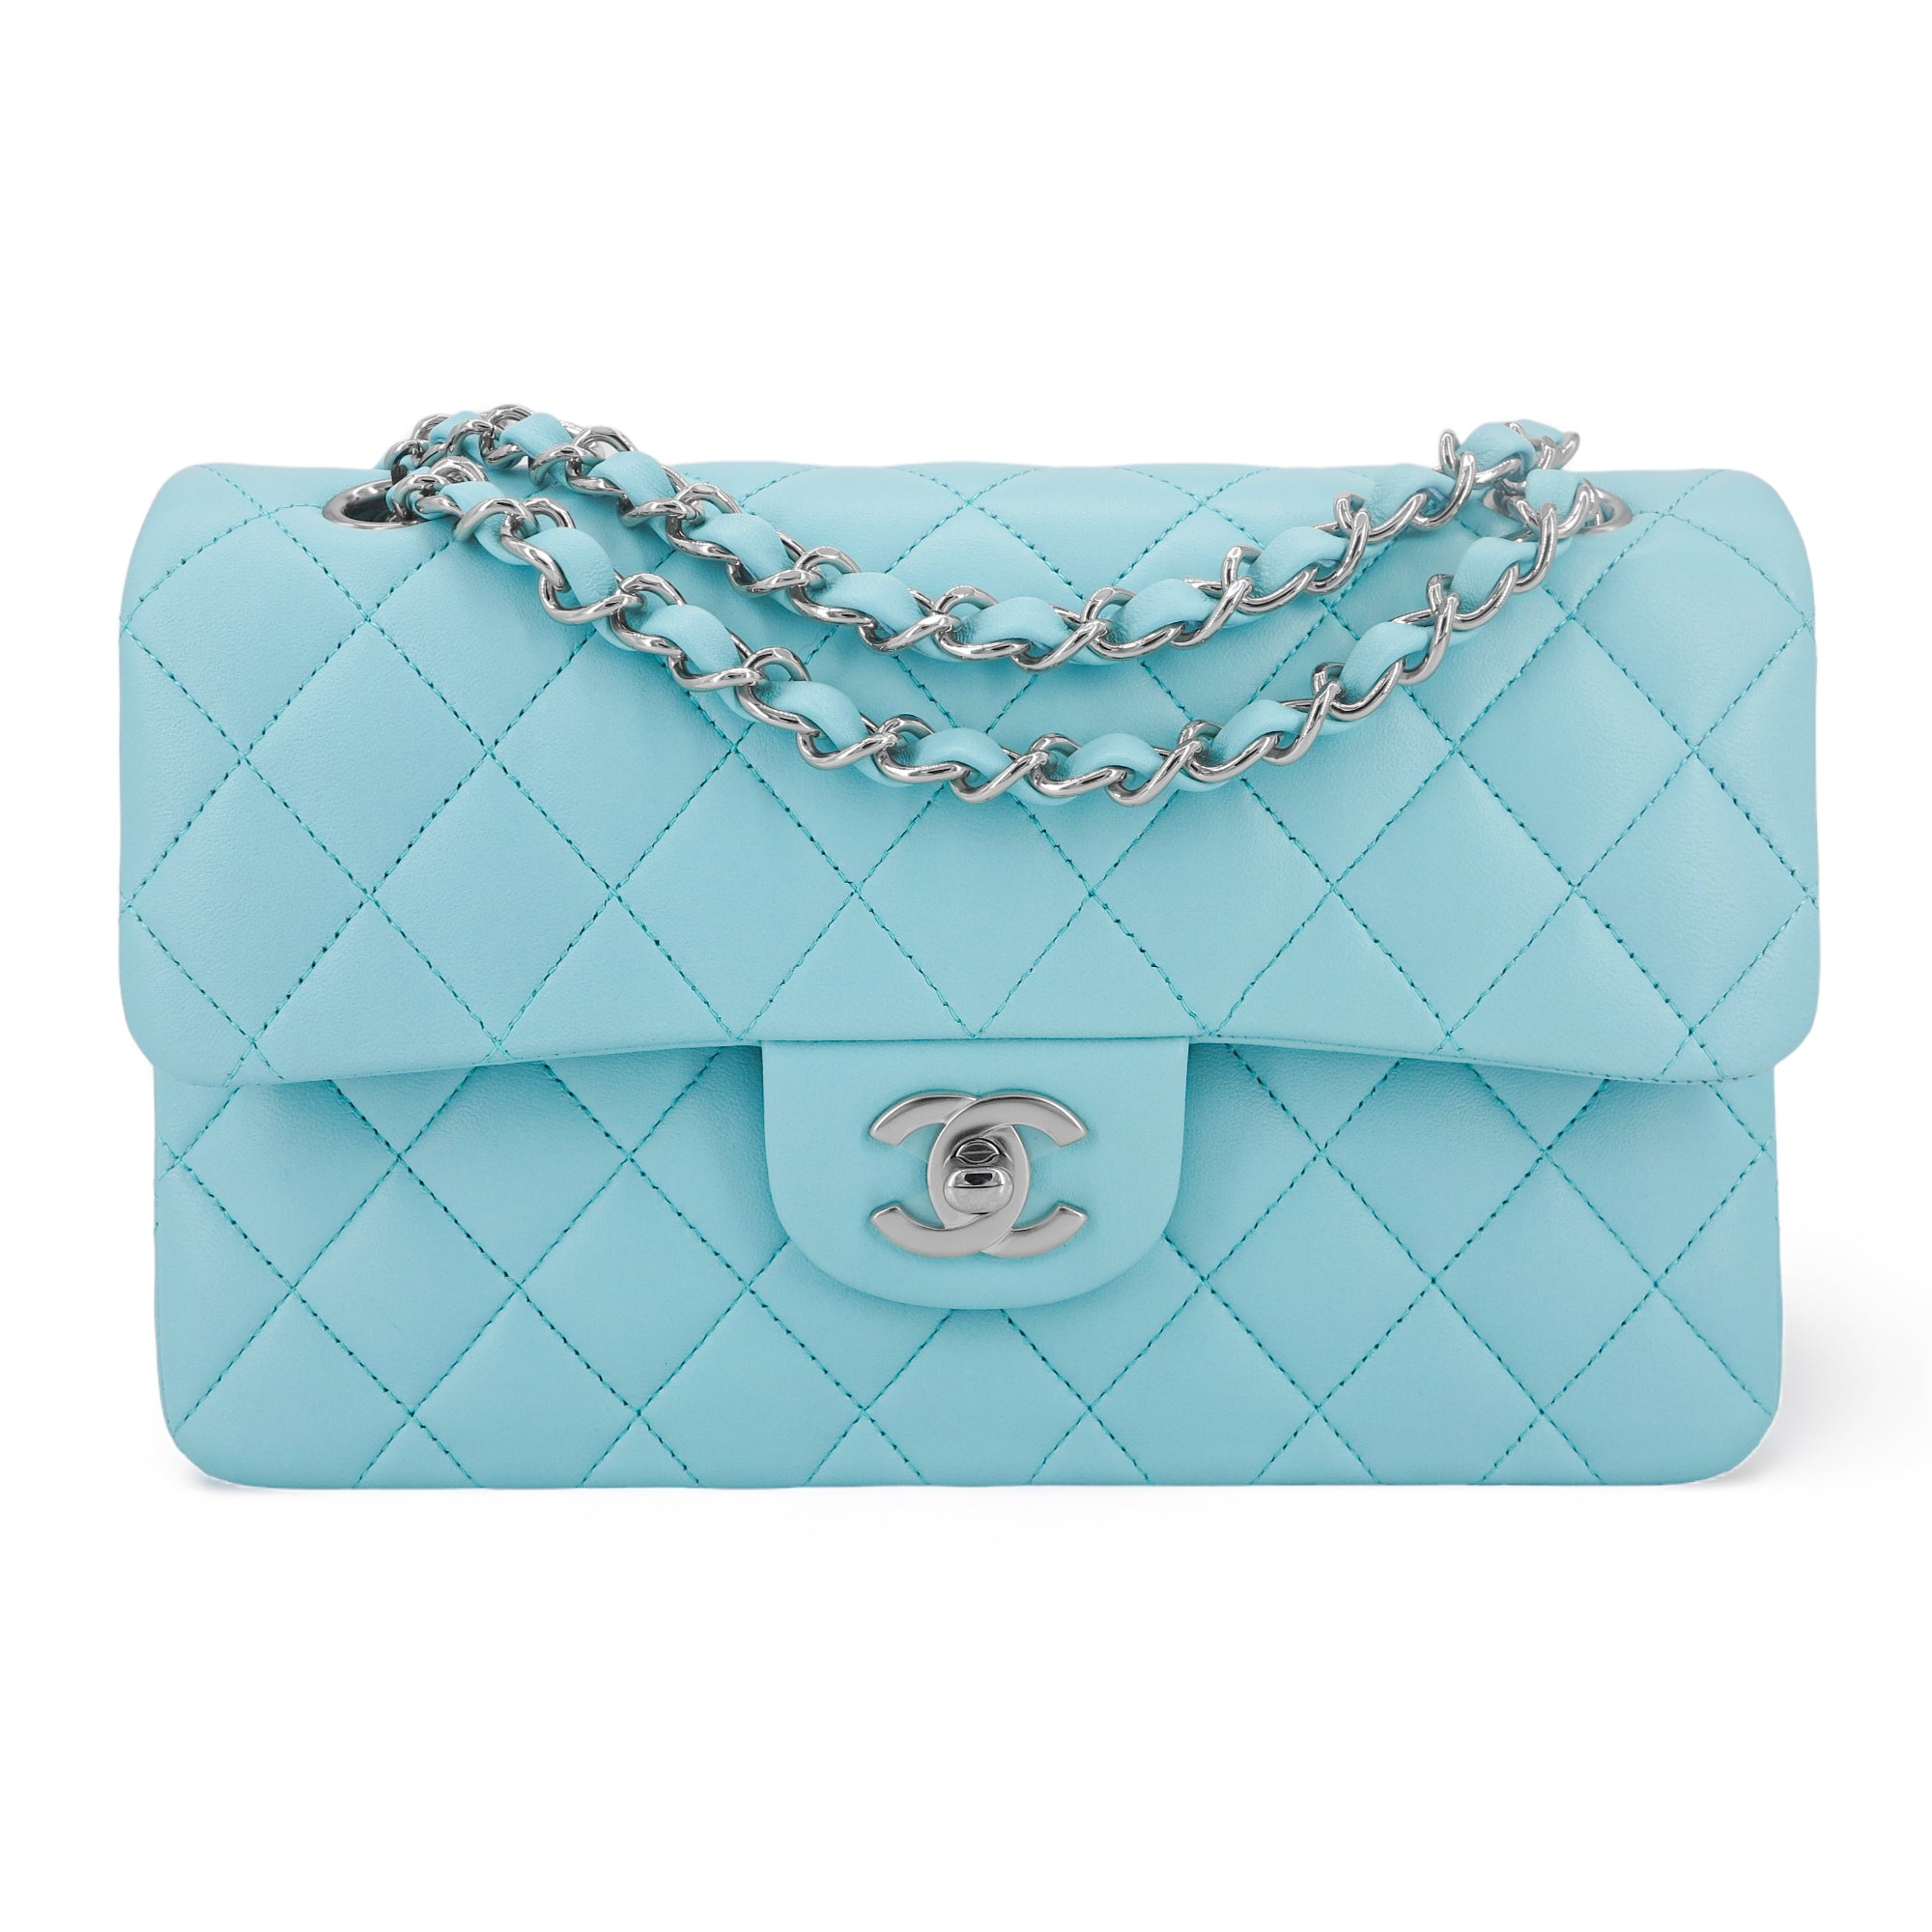 NEW Chanel AS3113B07634 Mini Flap Bag With Enamel And Gold Tone Metal Baby  Blue | eBay